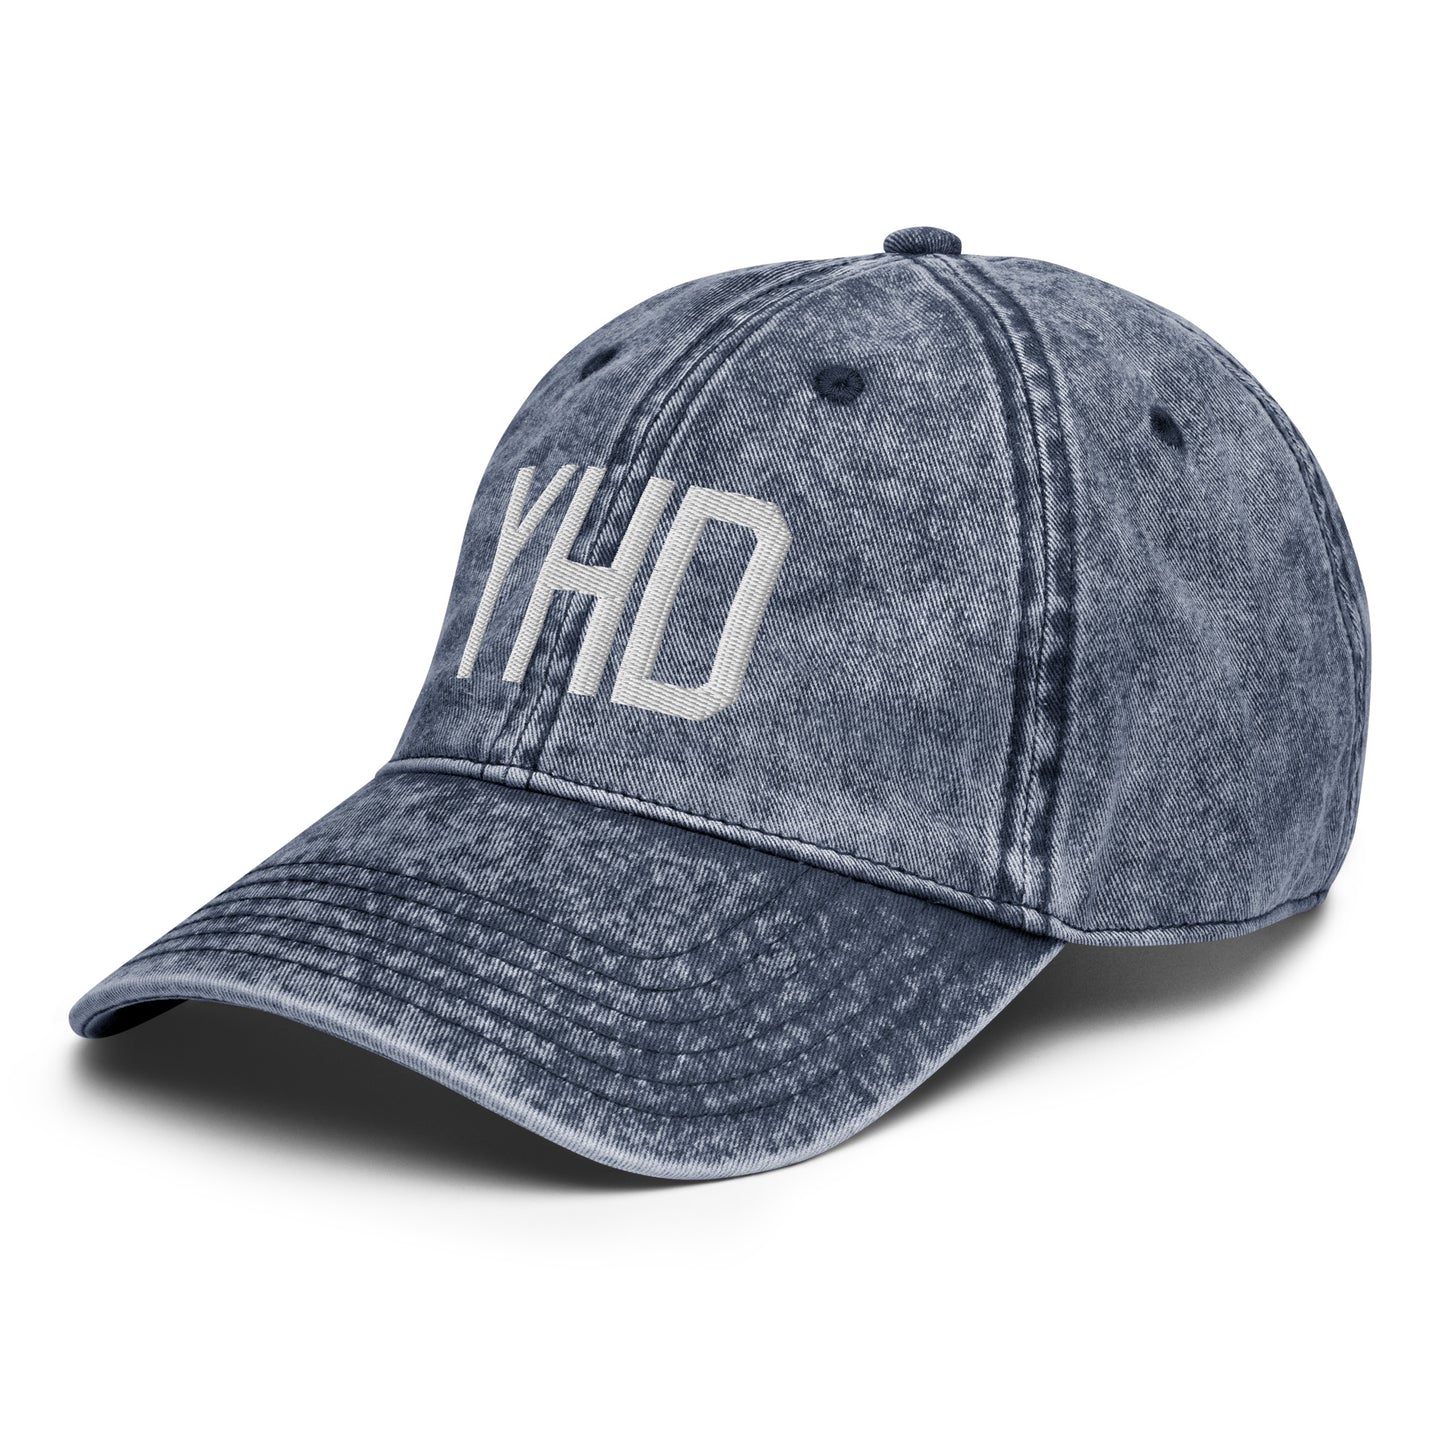 Airport Code Twill Cap - White • YHD Dryden • YHM Designs - Image 17